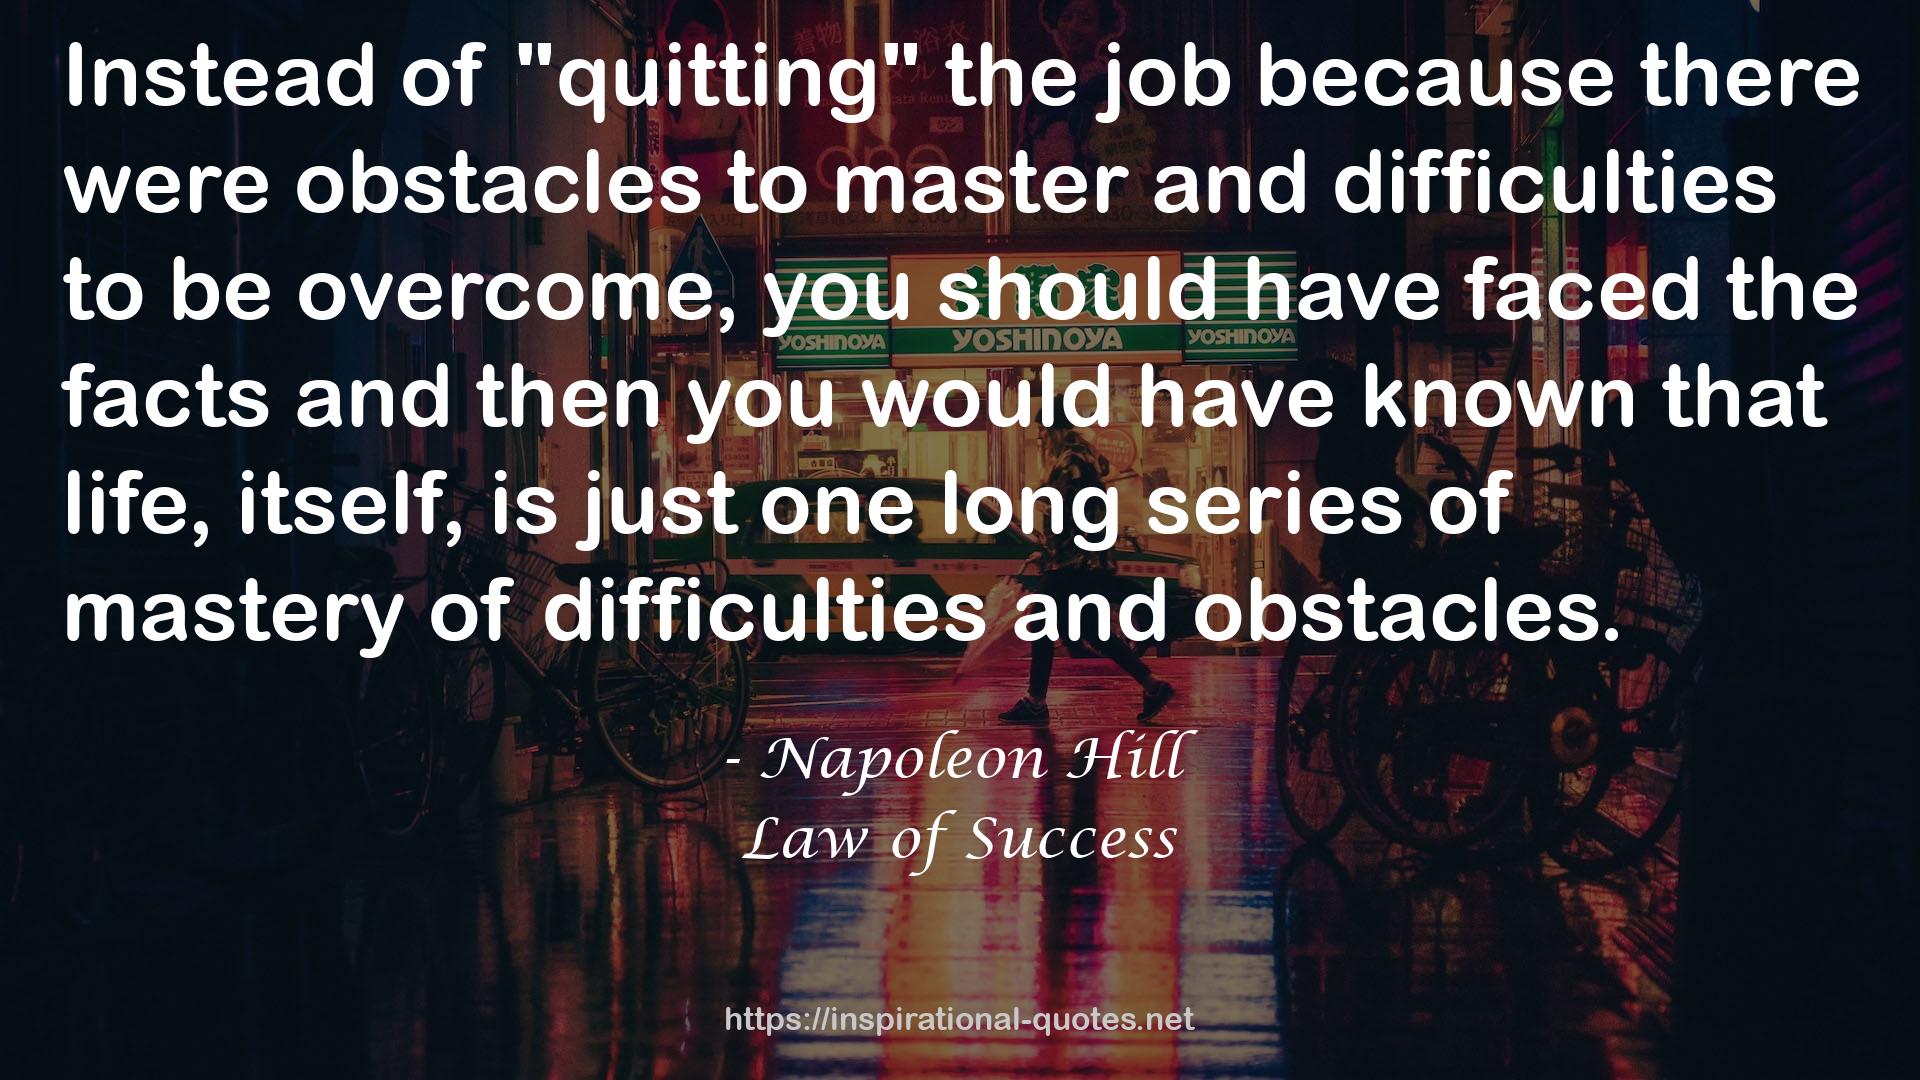 Law of Success QUOTES